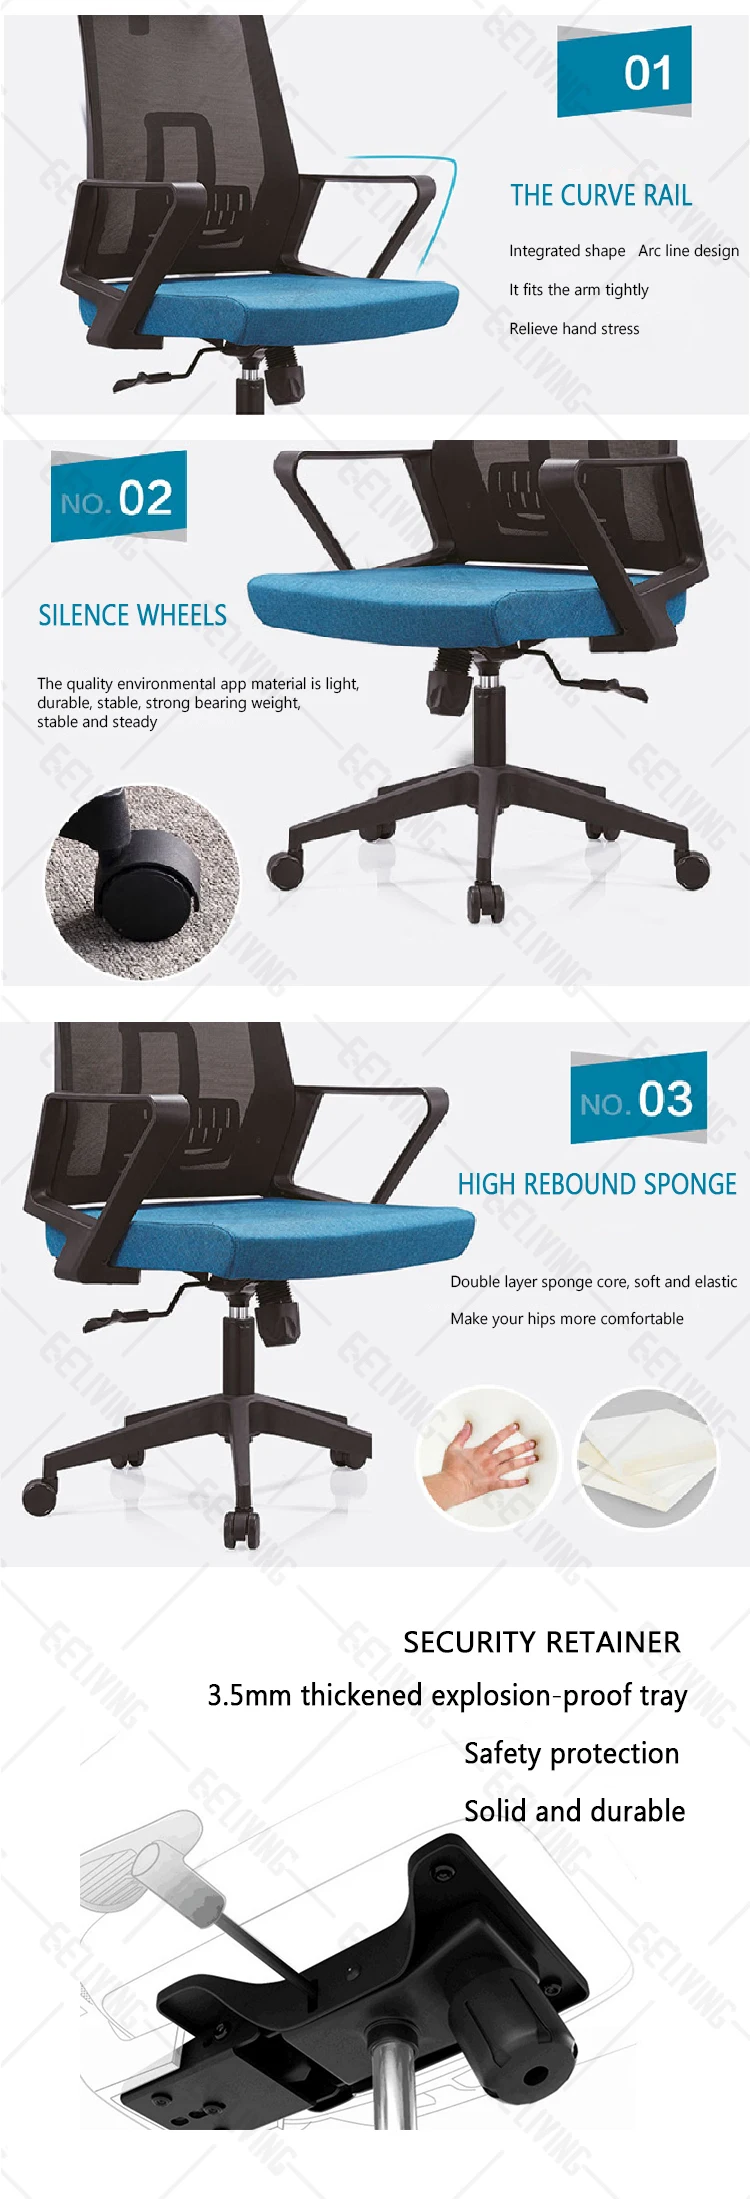 Ergonomic High Back Executive Chair Swivel Mesh Office Chair With Adjustable Headrest